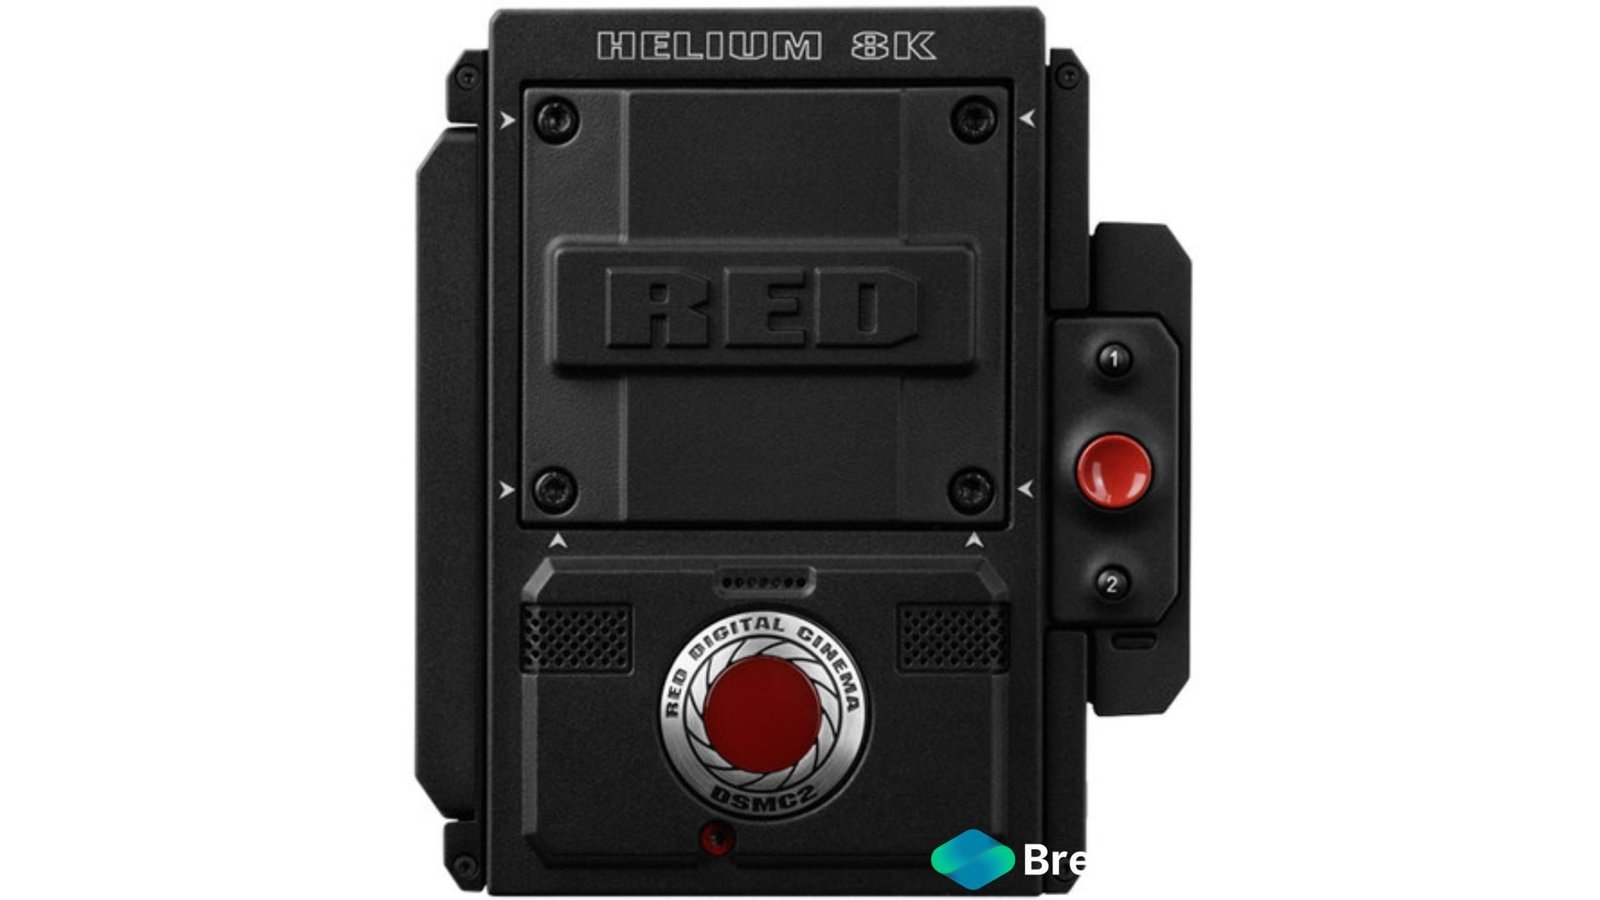 Rent the RED HELIUM in Delhi NCR, Camera accessories, in Delhi Gurgaon Noida, hire Shooting equipment, Lighting equipment rental, Film gear rental for Video production, camera rental company in Delhi, film equipment rental company